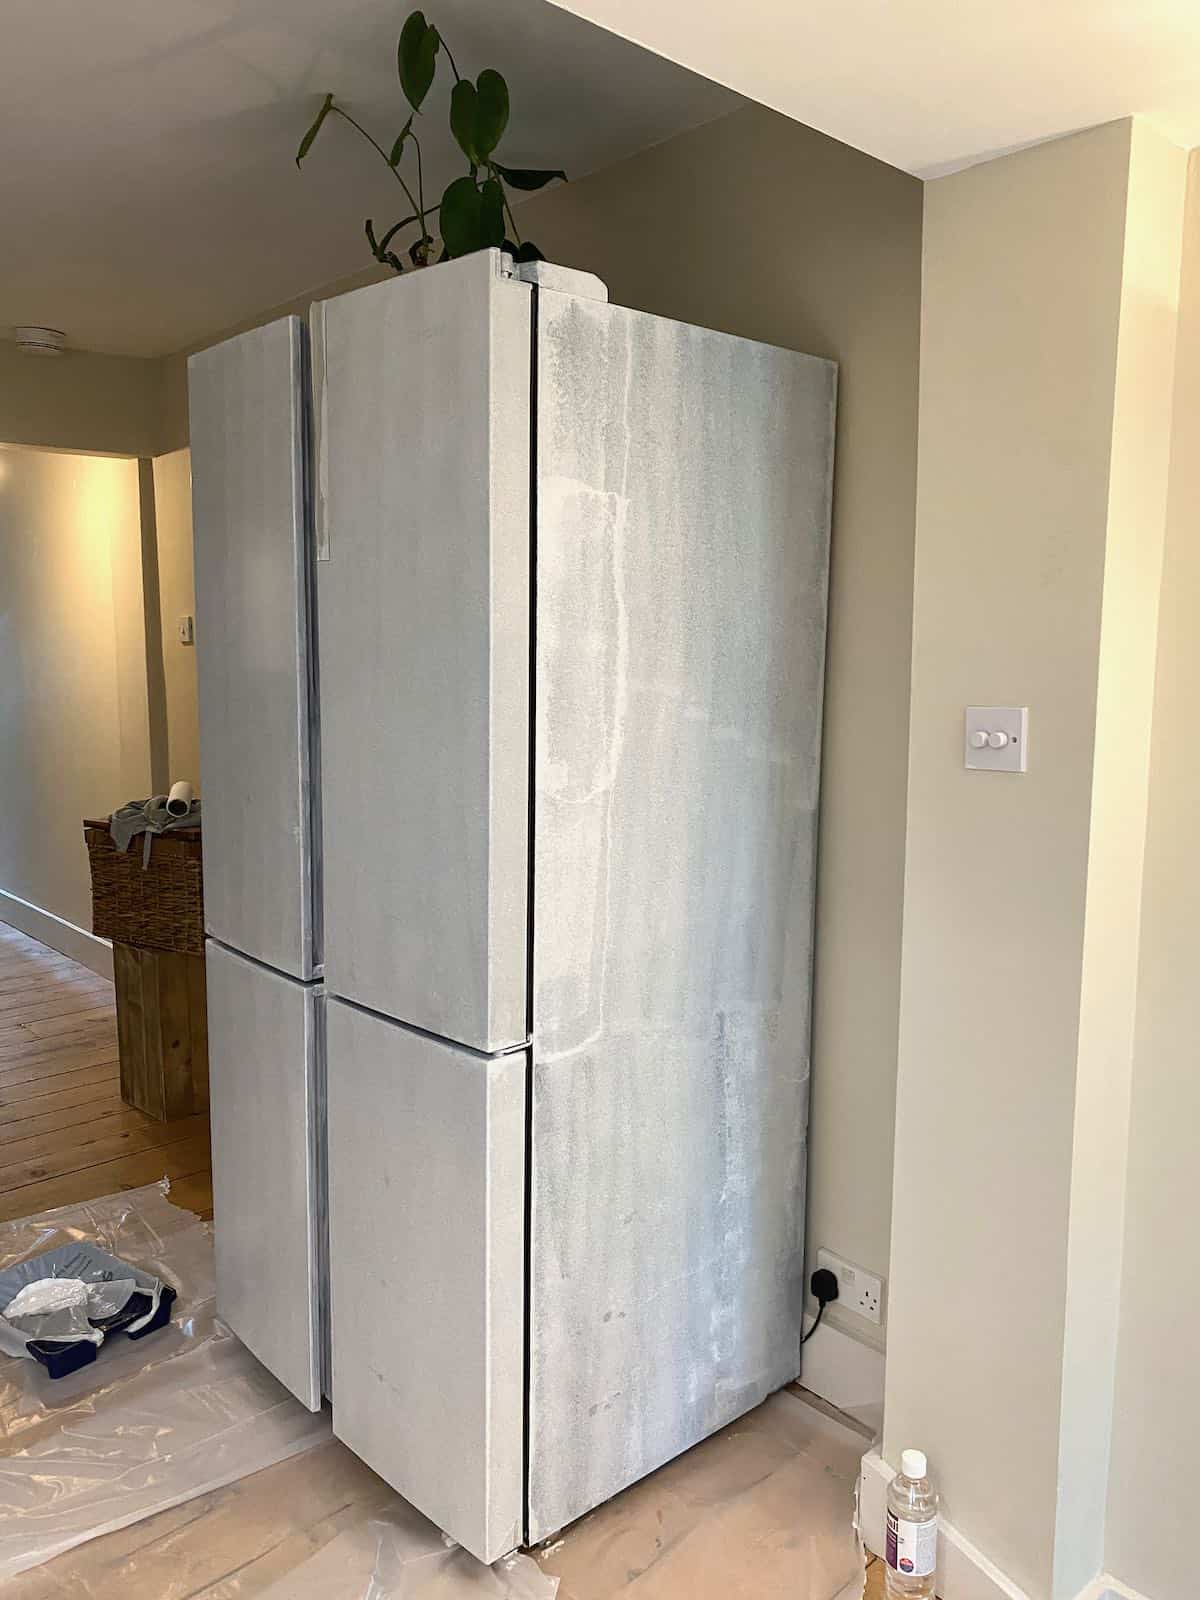 The side of a fridge freezer painted in primer